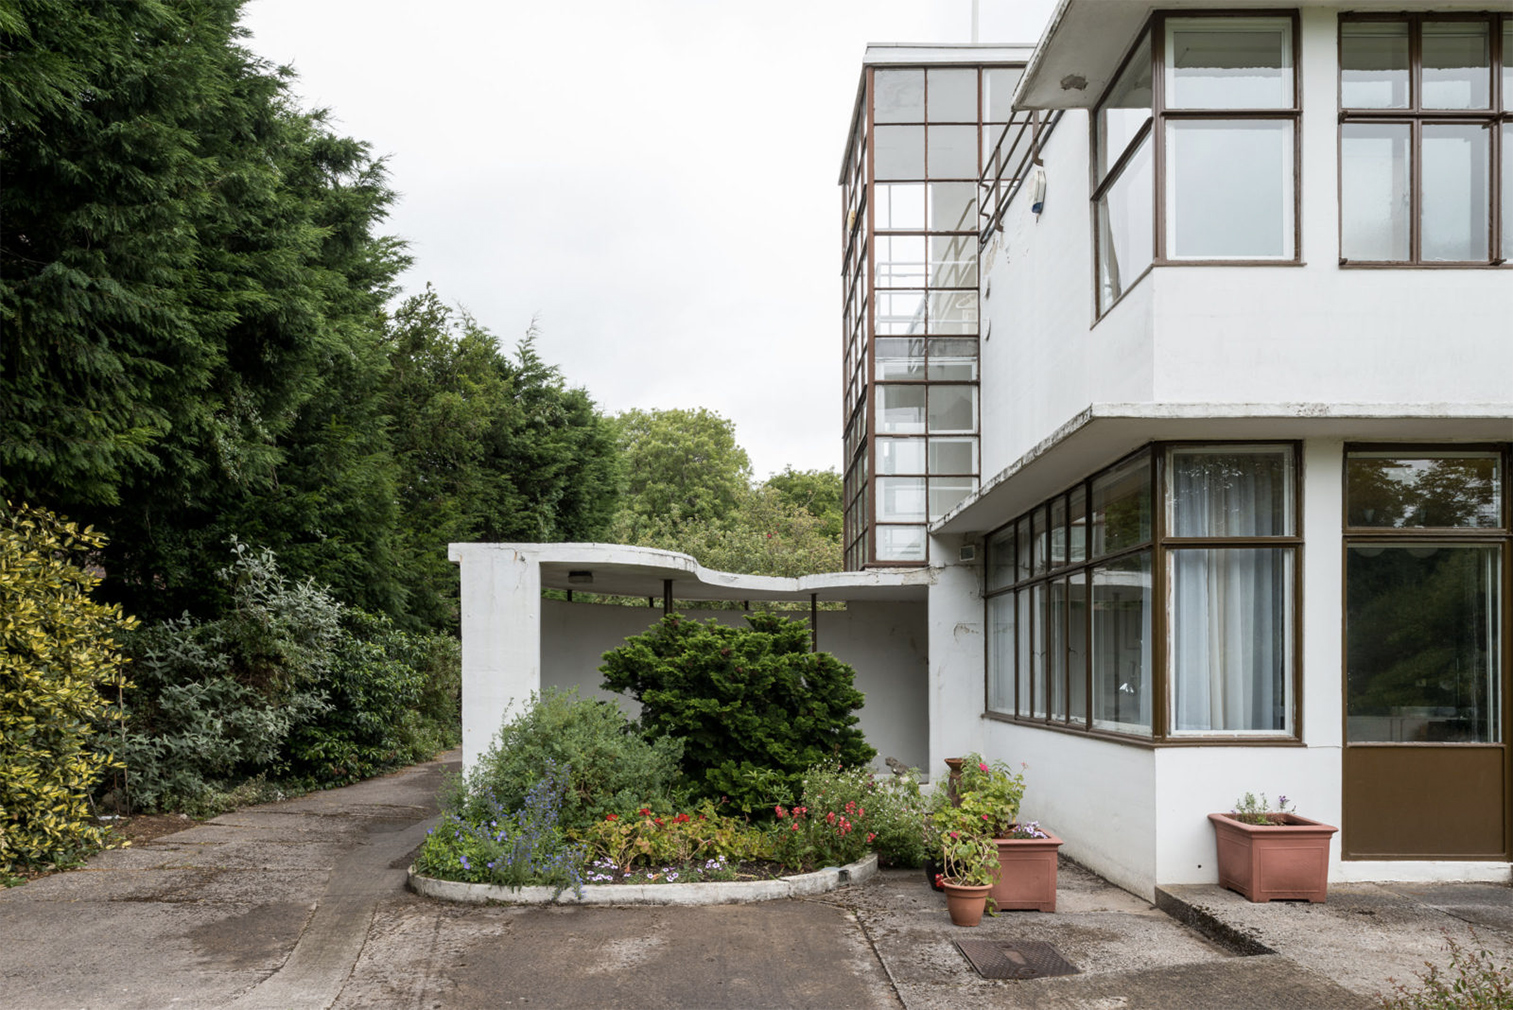 Rare Bristol home built with Le Corb’s Dom-ino system goes up for sale